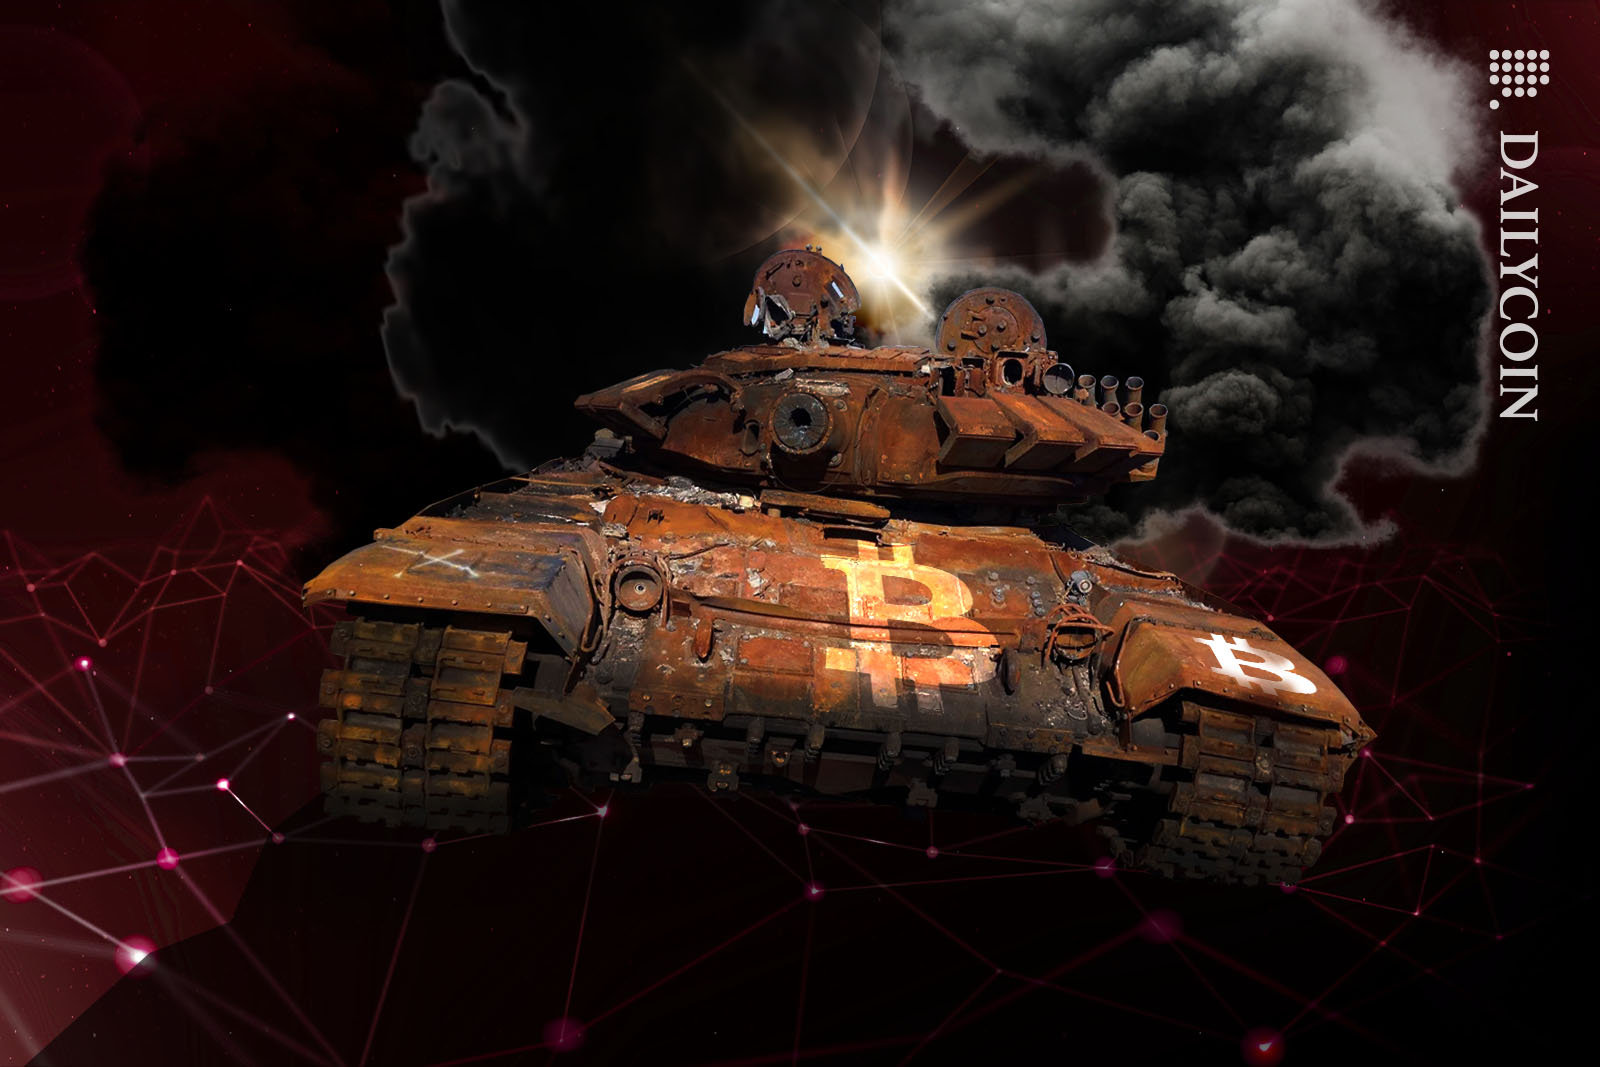 Burned out Russian tank sitting in a digital environment, with Bitcoin logos painted on it and smoke coming out its back.